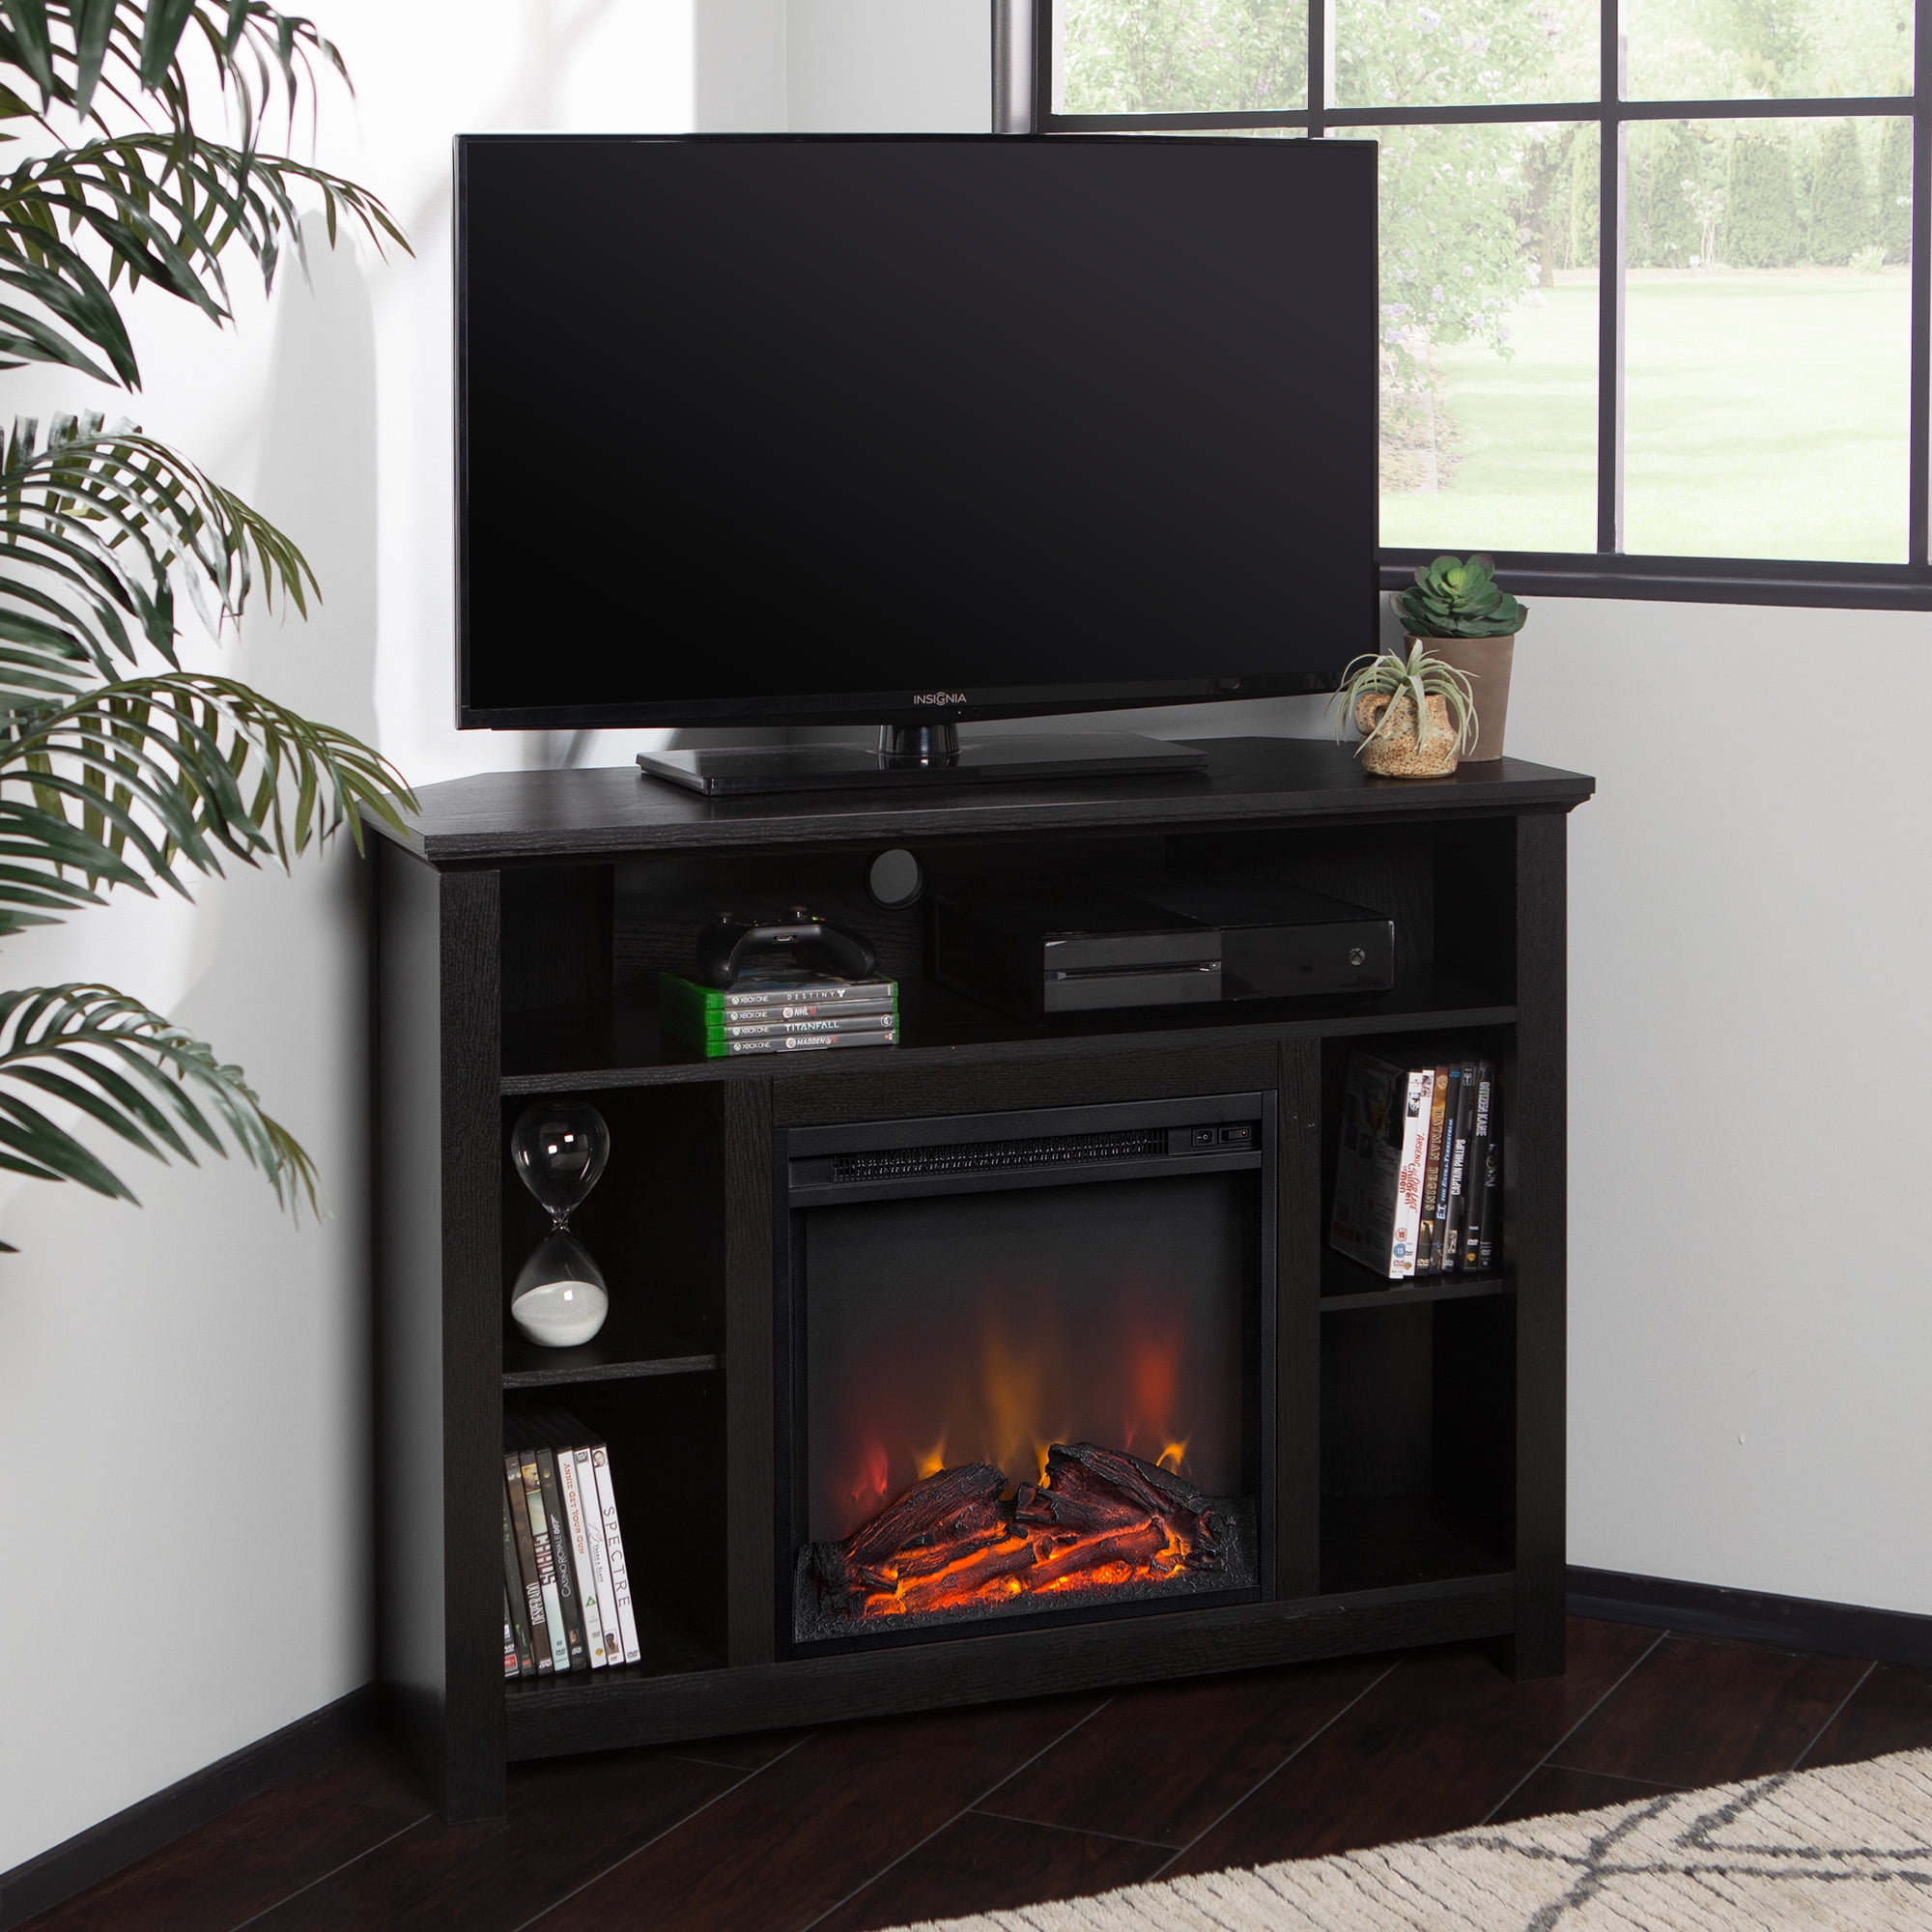 Do everything with my power Numeric coal Manor Park Tall Corner Fireplace TV Stand for TVs up to 50", Black -  Walmart.com